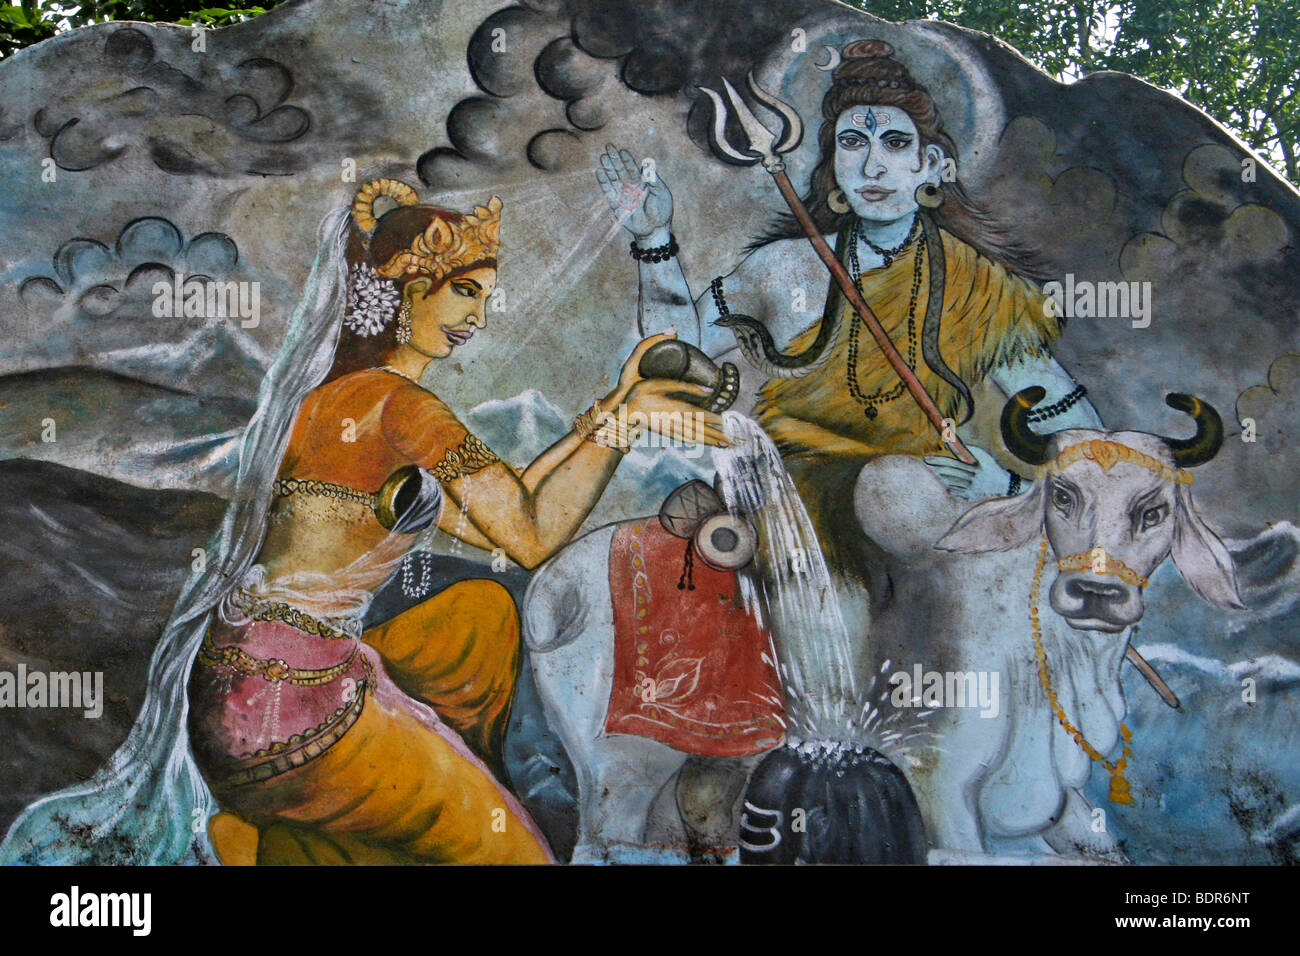 Hindu Painitng Of Lord Shiva With Nandi The Bull On A Temple In Orissa, India Stock Photo